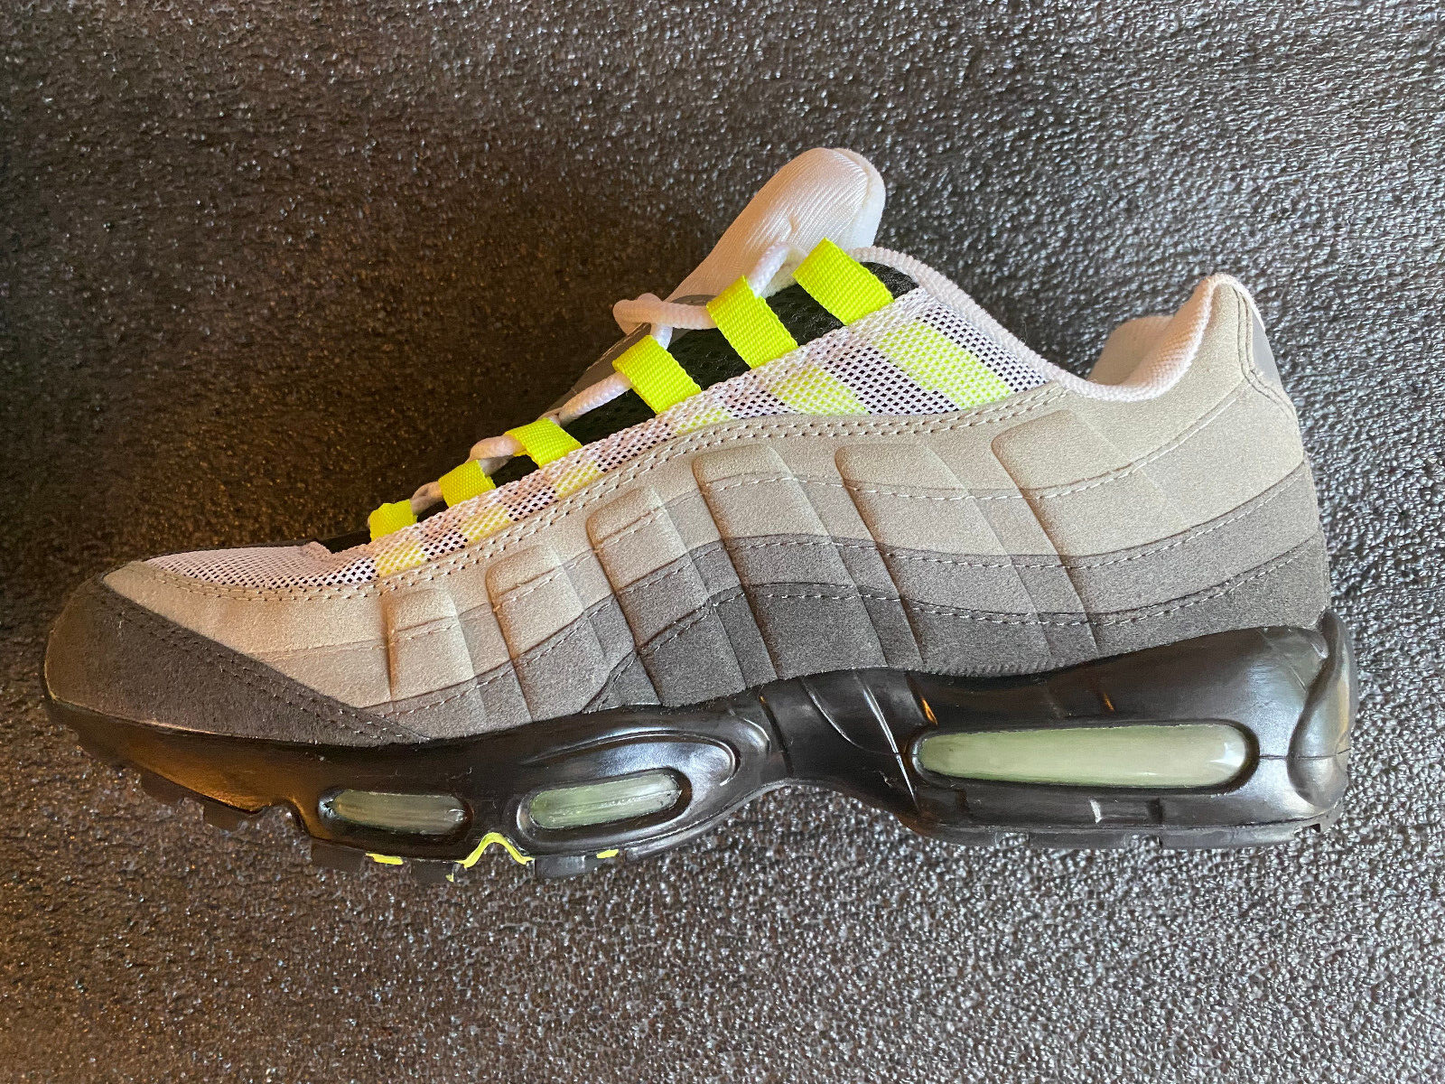 Nike Ir Max 95 Neon vintage OG colourway new with defects US 12 UK 11  EUR 46